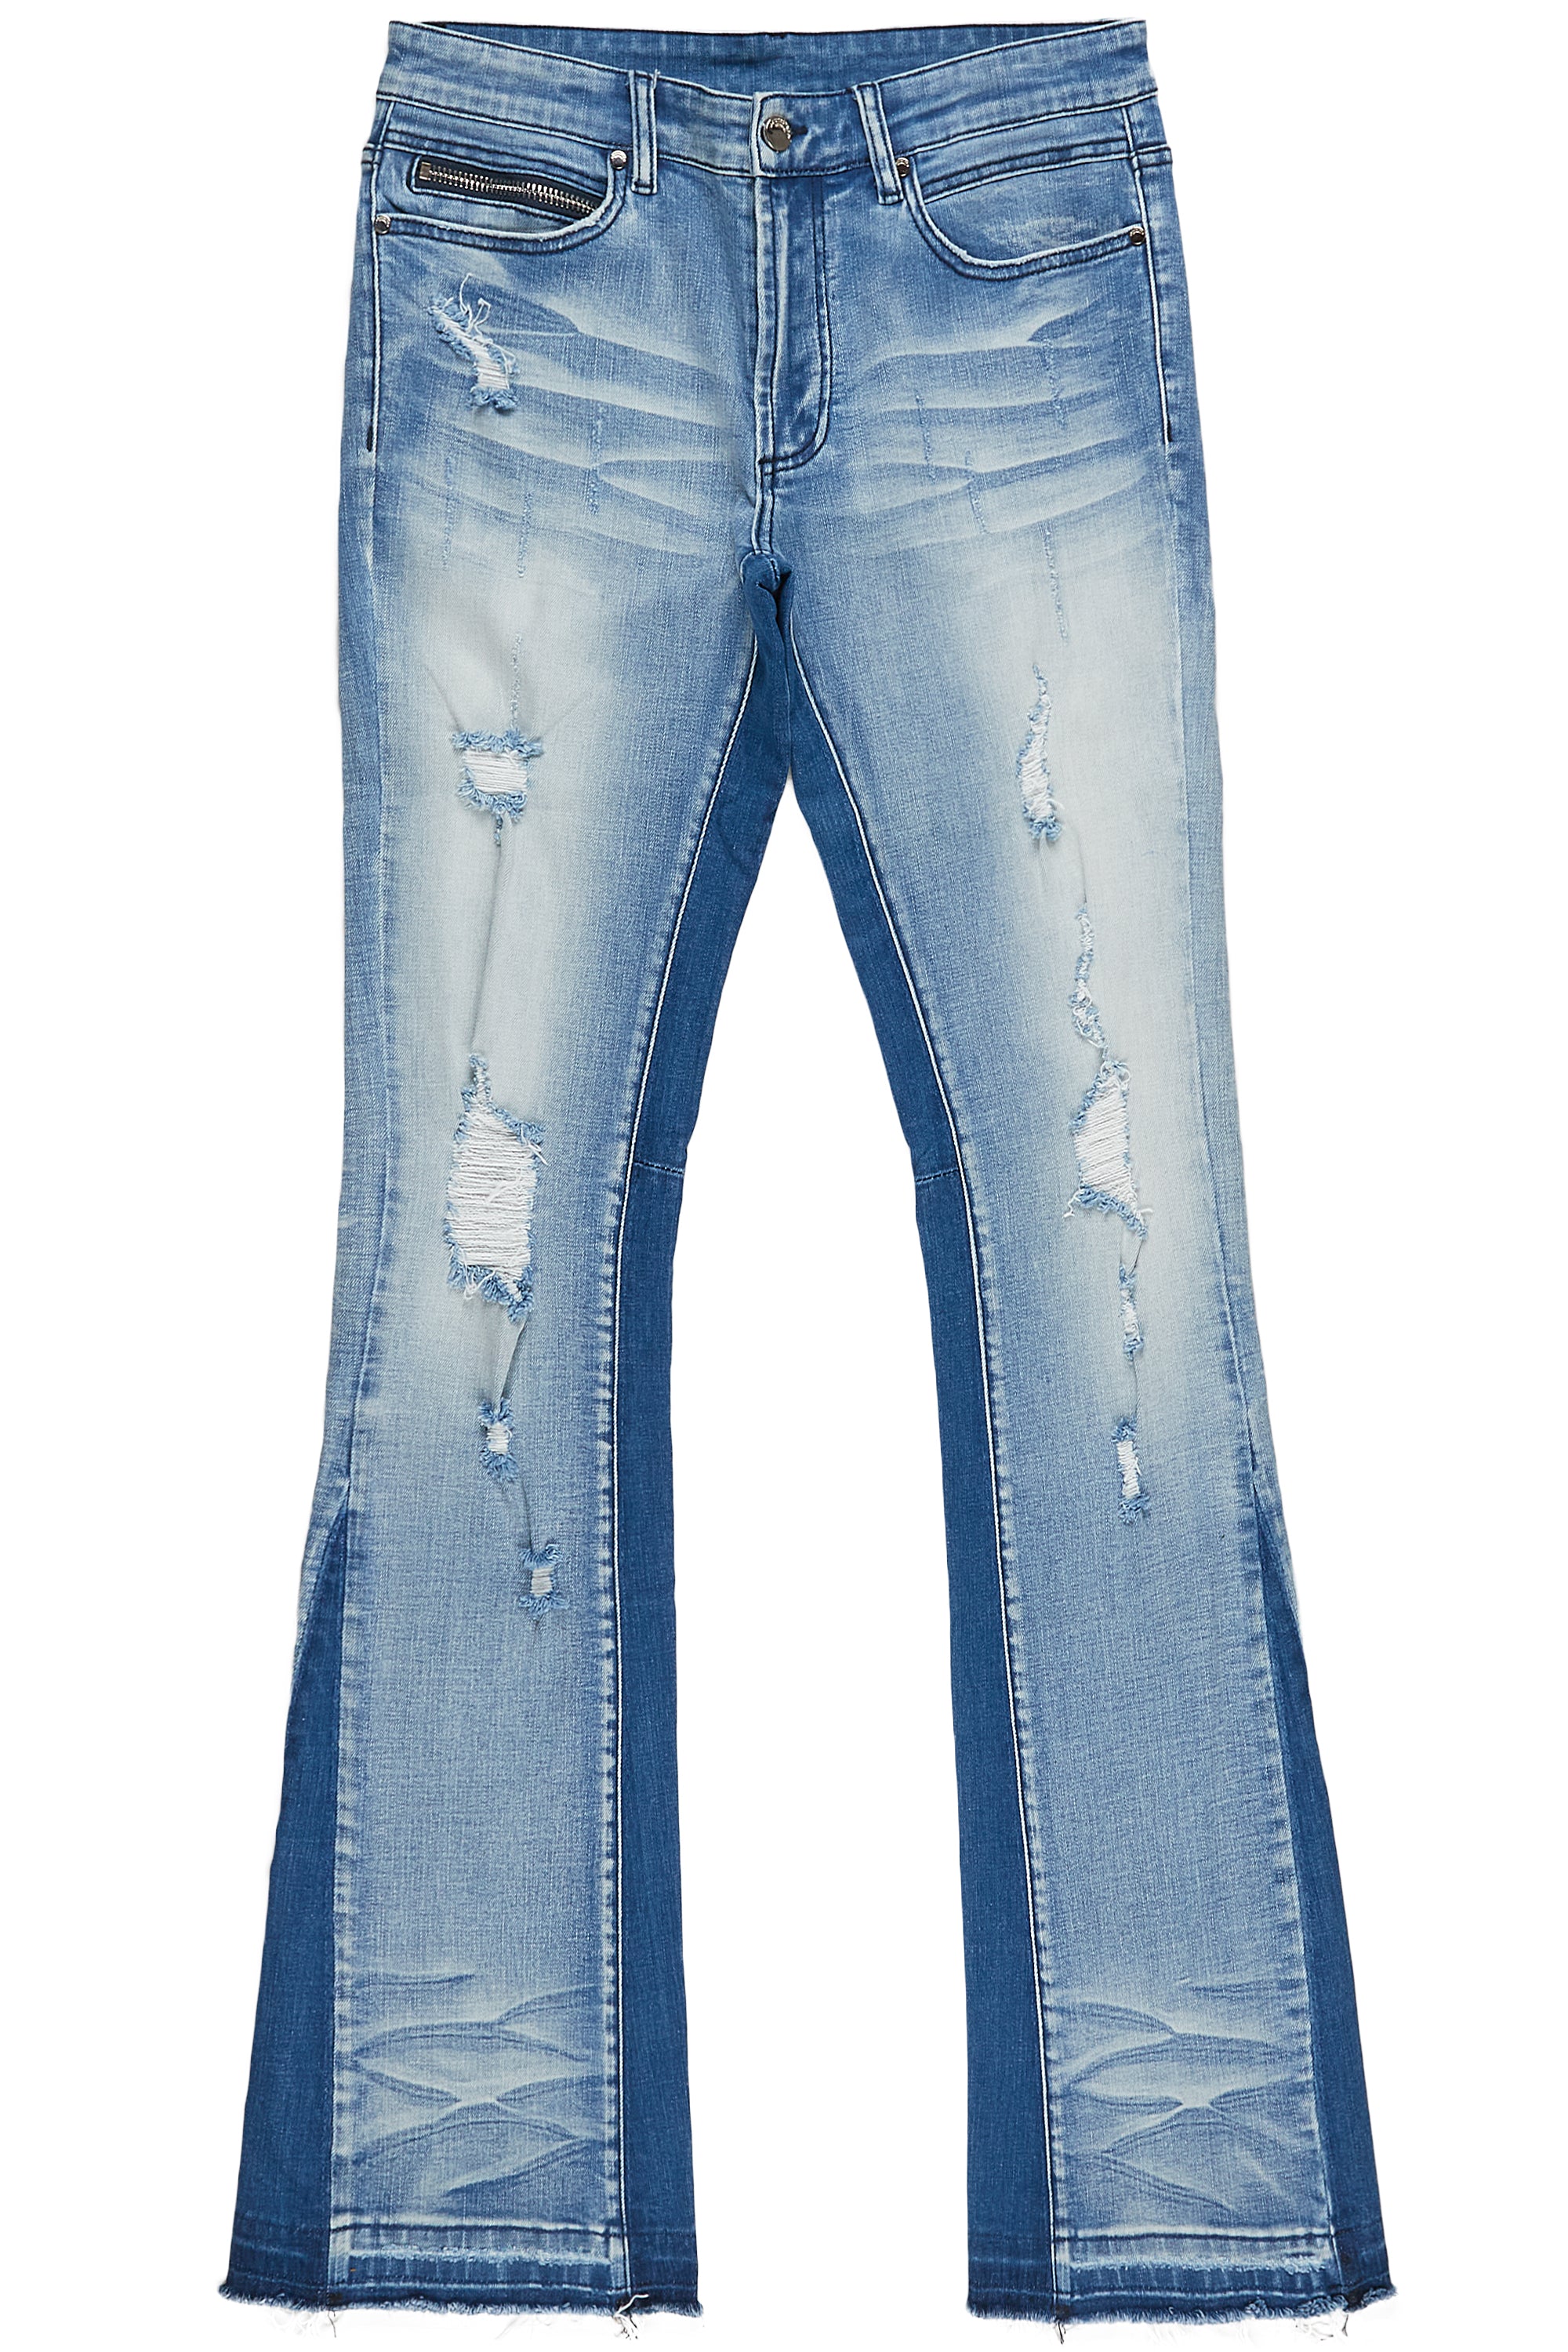 Tibbs Blue Stacked Flare Jean